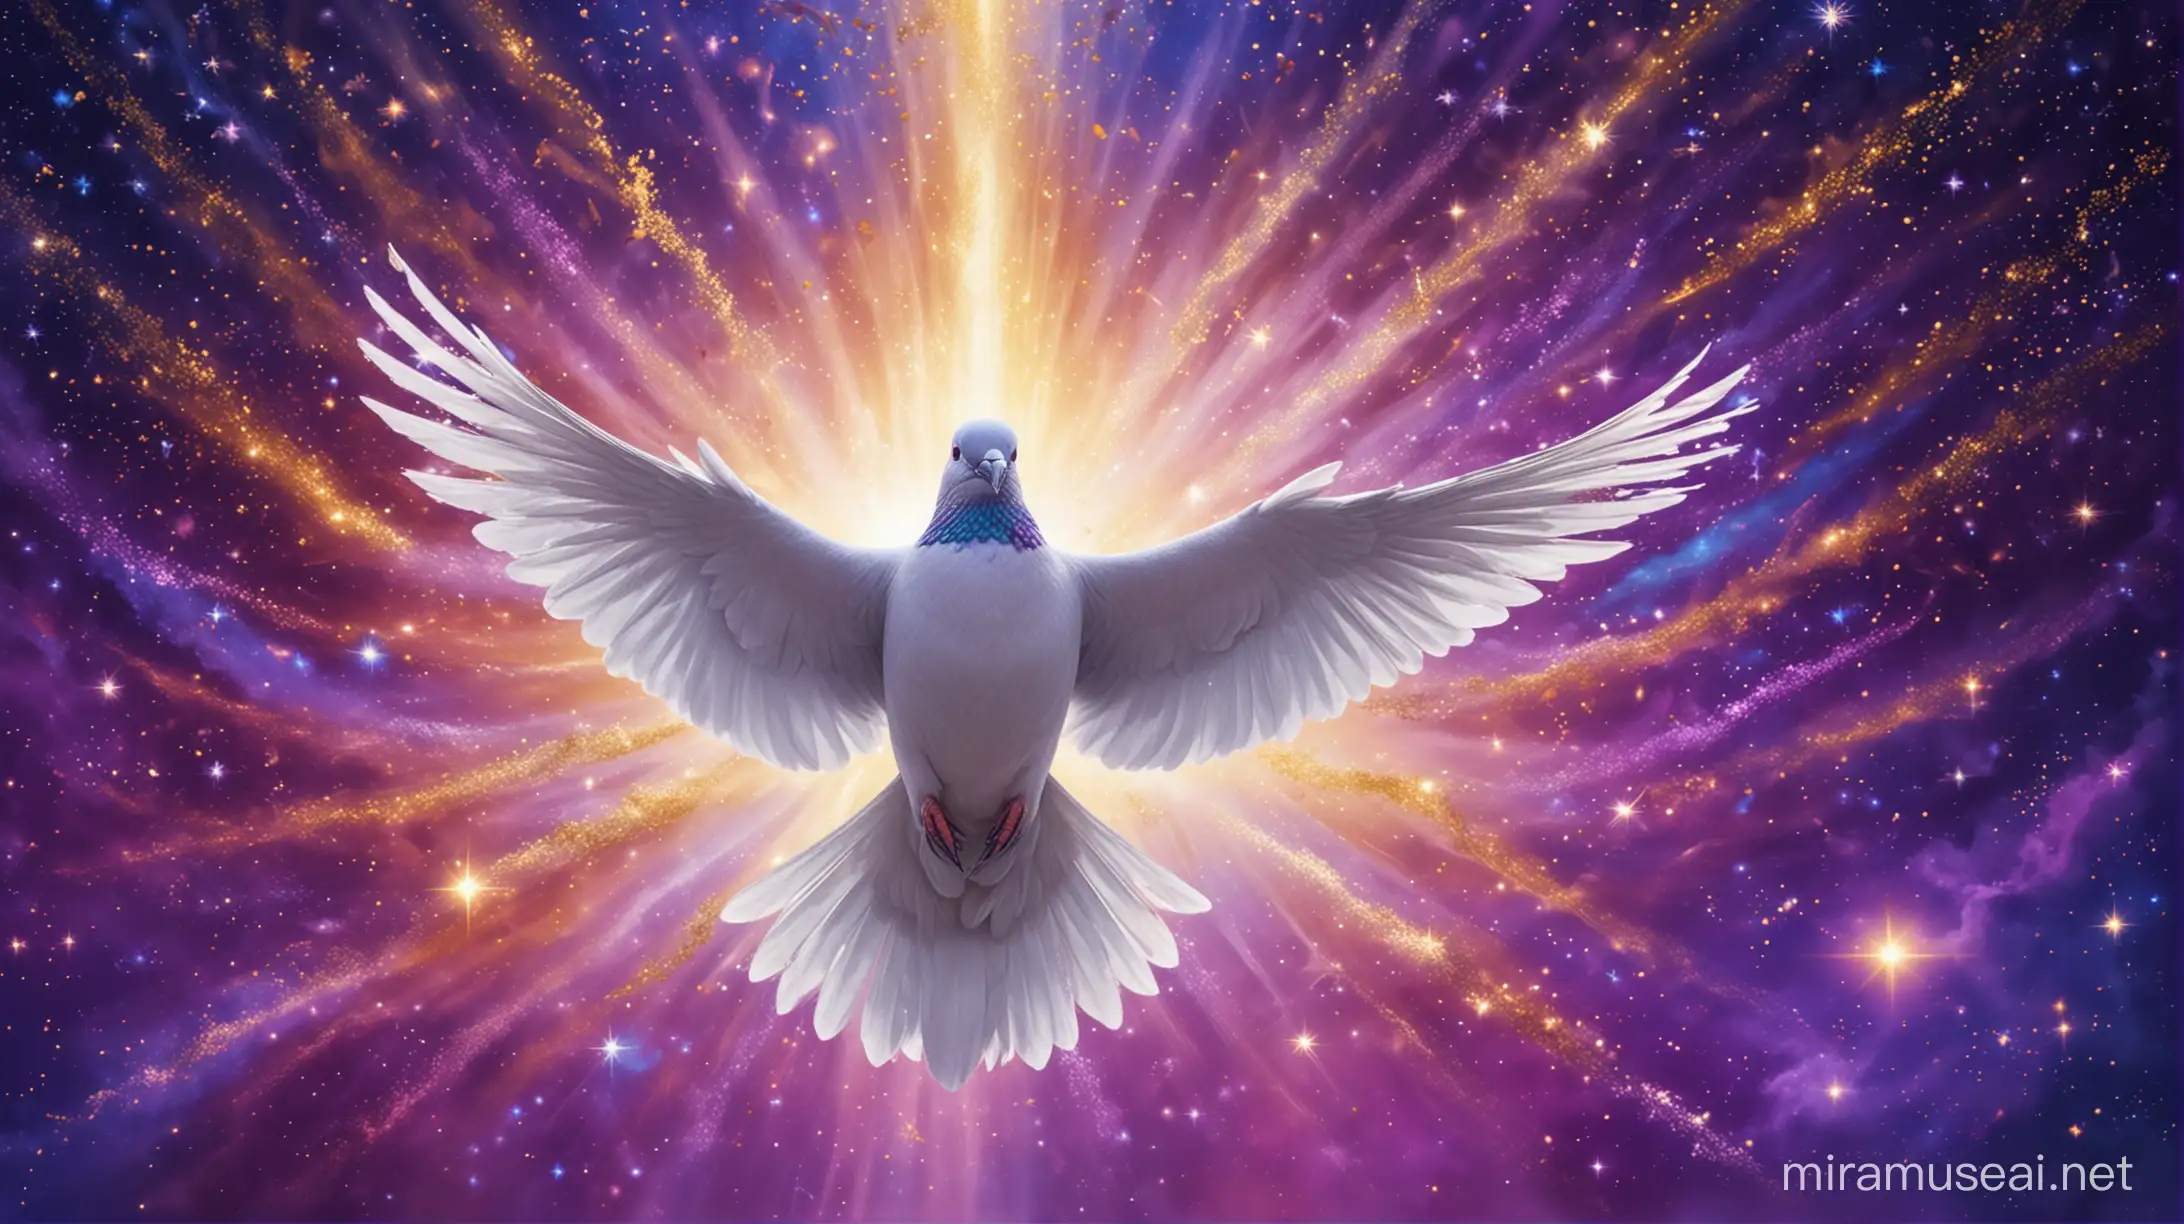 KRoyal blue background and violet, rays of light. Nebula and stardust. A pearly white dove flies. The pigeon emits bright energy into the environment. Gold and silver glitter in the dove's feathers. Fiery flames glow from behind the dove.